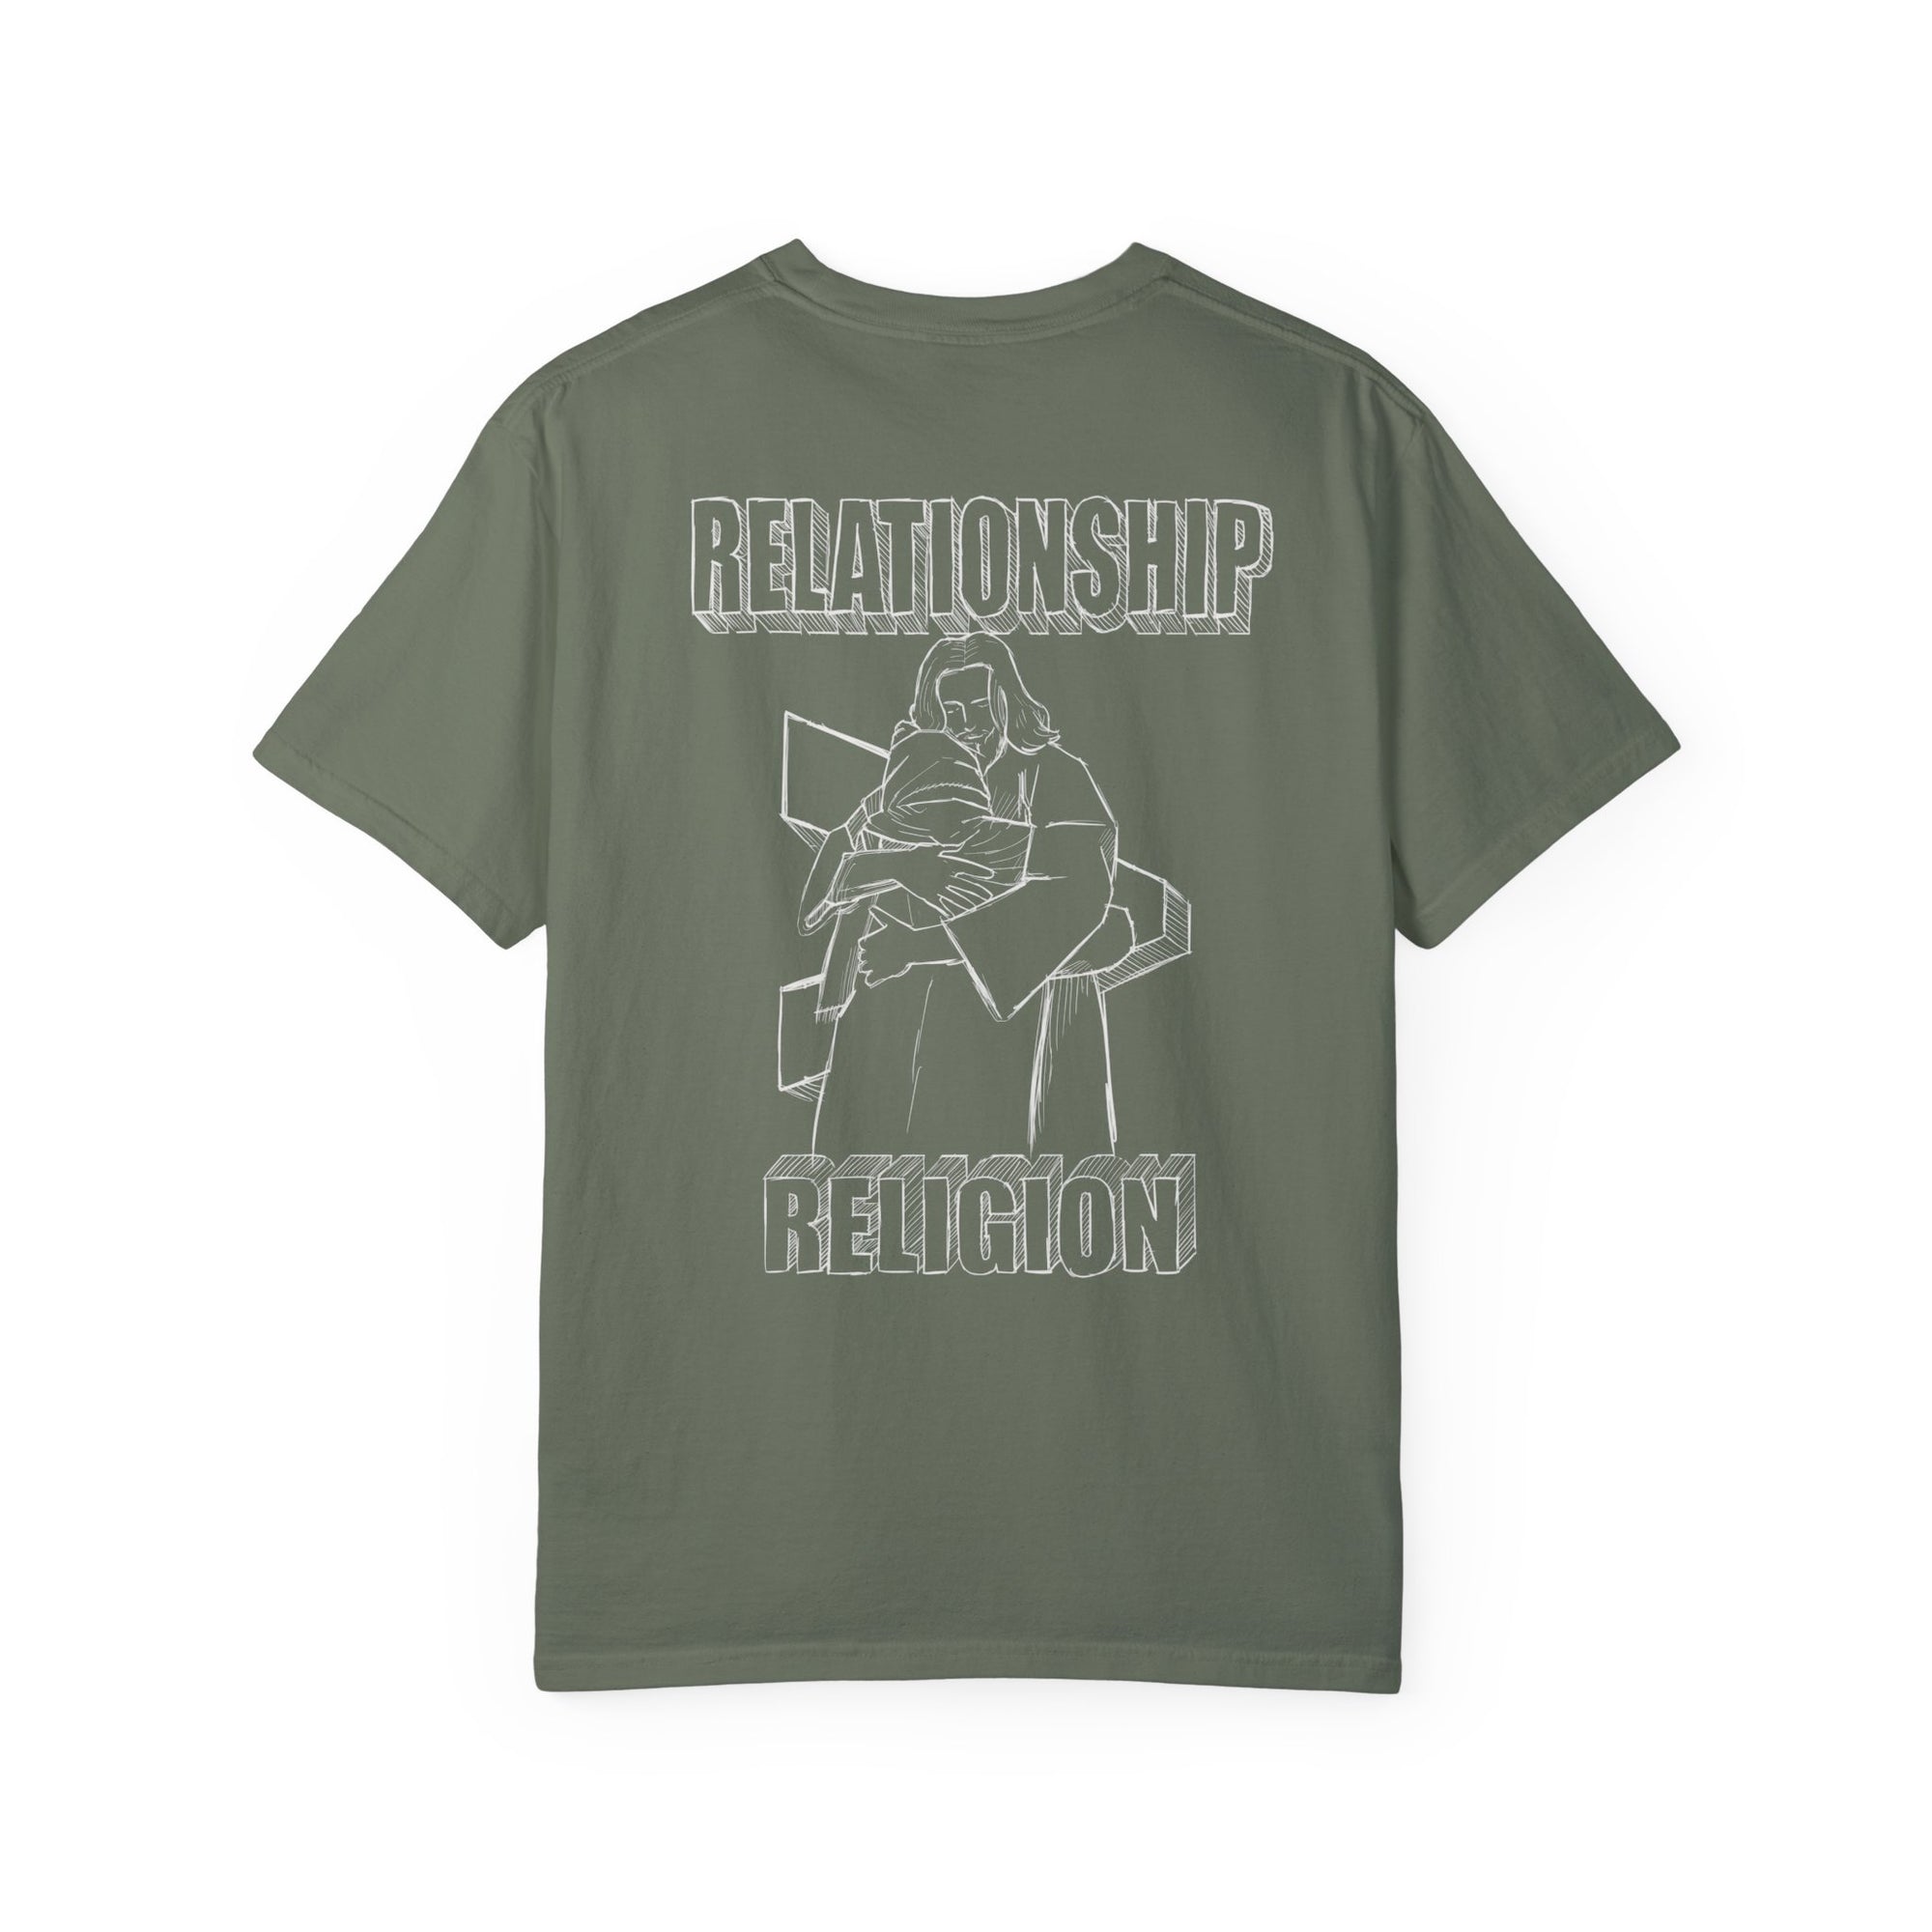 Relationship Over Religion Tee